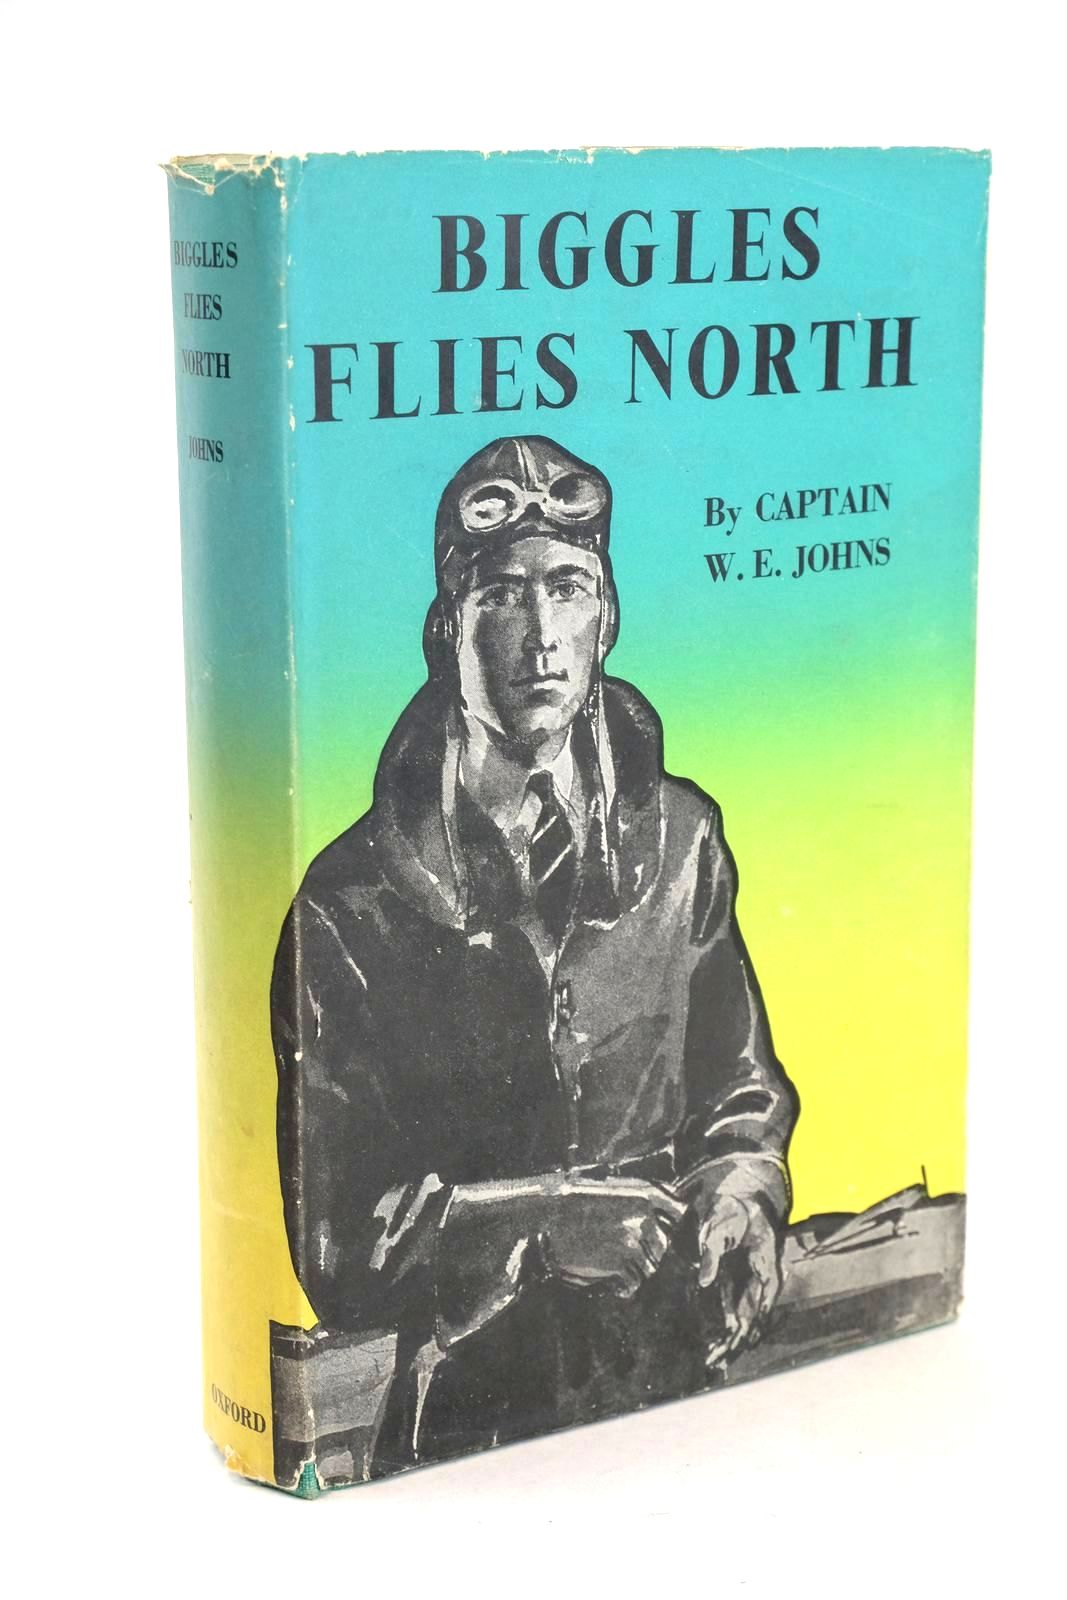 Photo of BIGGLES FLIES NORTH written by Johns, W.E. illustrated by Narraway, Will published by Oxford University Press, Geoffrey Cumberlege (STOCK CODE: 1326290)  for sale by Stella & Rose's Books